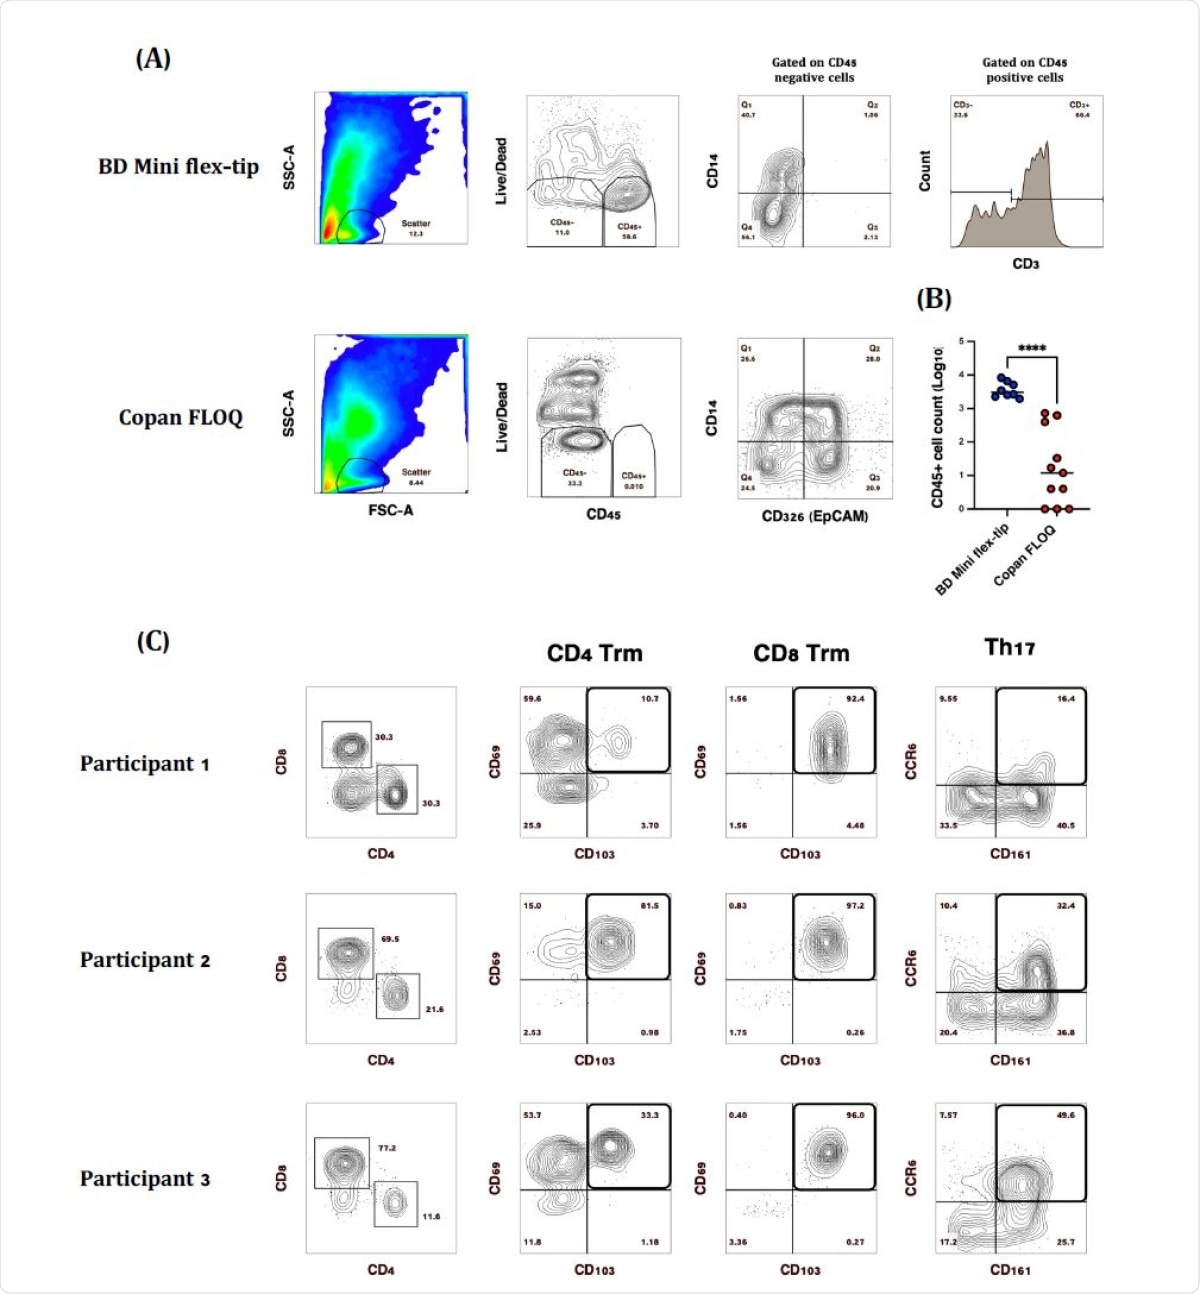 Comparison of SARS-CoV-2 diagnostic testing nasopharyngeal (NP) swabs for immune cell recovery. Representative plots of CD45+ nasal immune cells isolated from (A) BD Mini Flex-tip swabs, majority of which (~40-90%) were CD3+ and Copan FLOQ swabs from which epithelial (CD326 (EpCAM+) cells were the main cell type recovered. (B) Swab brand comparison of CD45+ immune cell recovery. (C) Representative plots of CD3+ T cell subsets isolated from BD Mini-tip flexible swabs. Majority of CD4+ and CD8+ T cells were Trm based on the expression of CD69 and CD103, while 16-50% of CD4 T cells were Th17 based on the expression of CD161 and CCR6. (****P>0.0001)